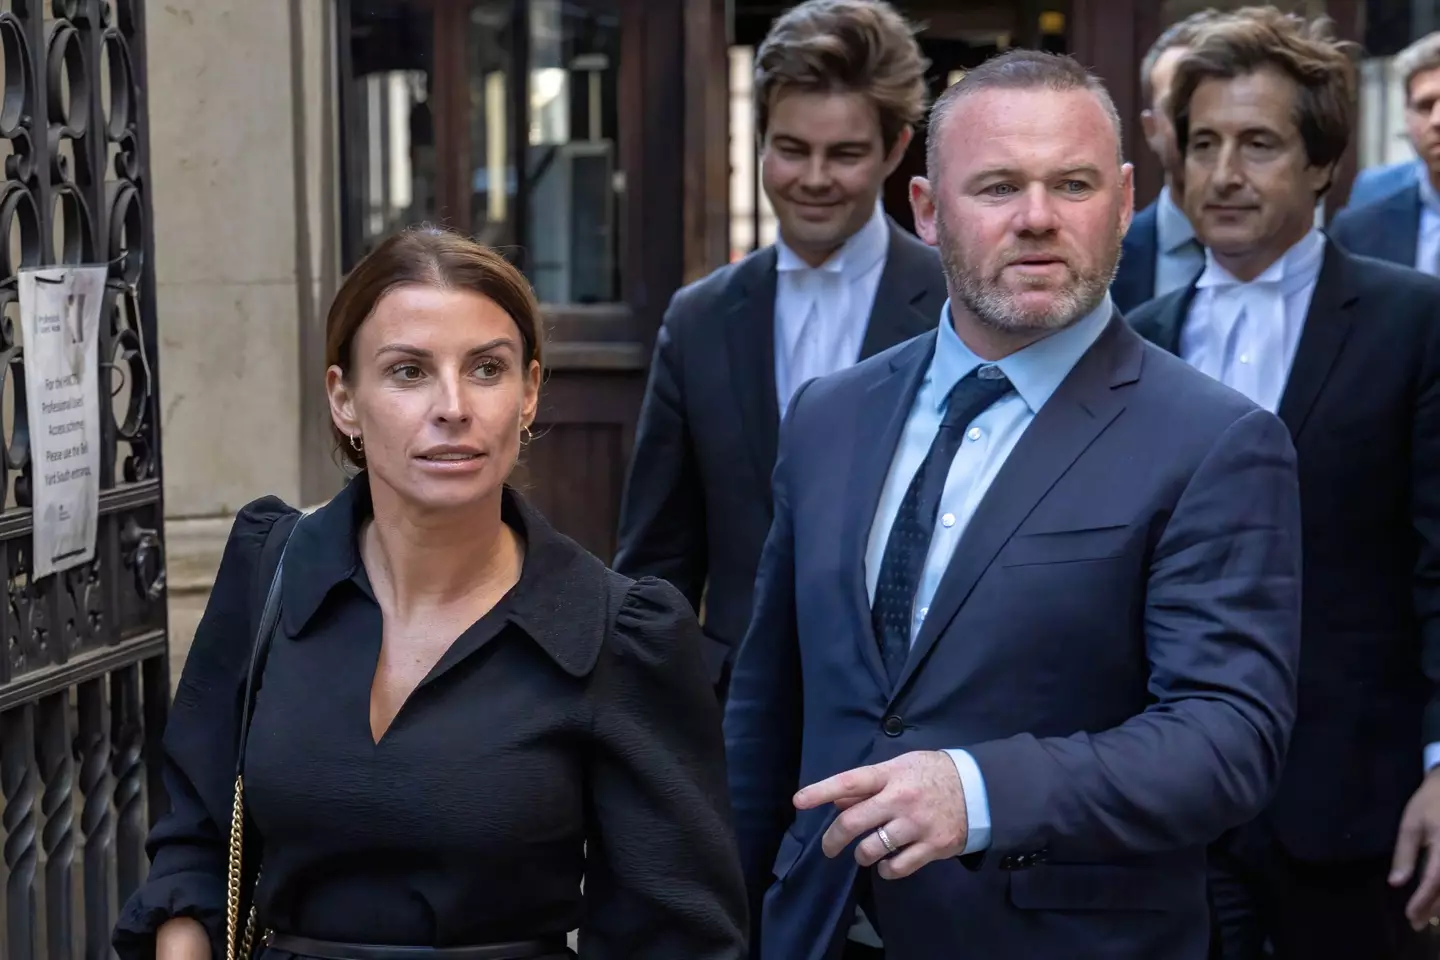 Rebekah had sued Coleen Rooney for libel over her claims that Vardy had leaked stories about her to the press.